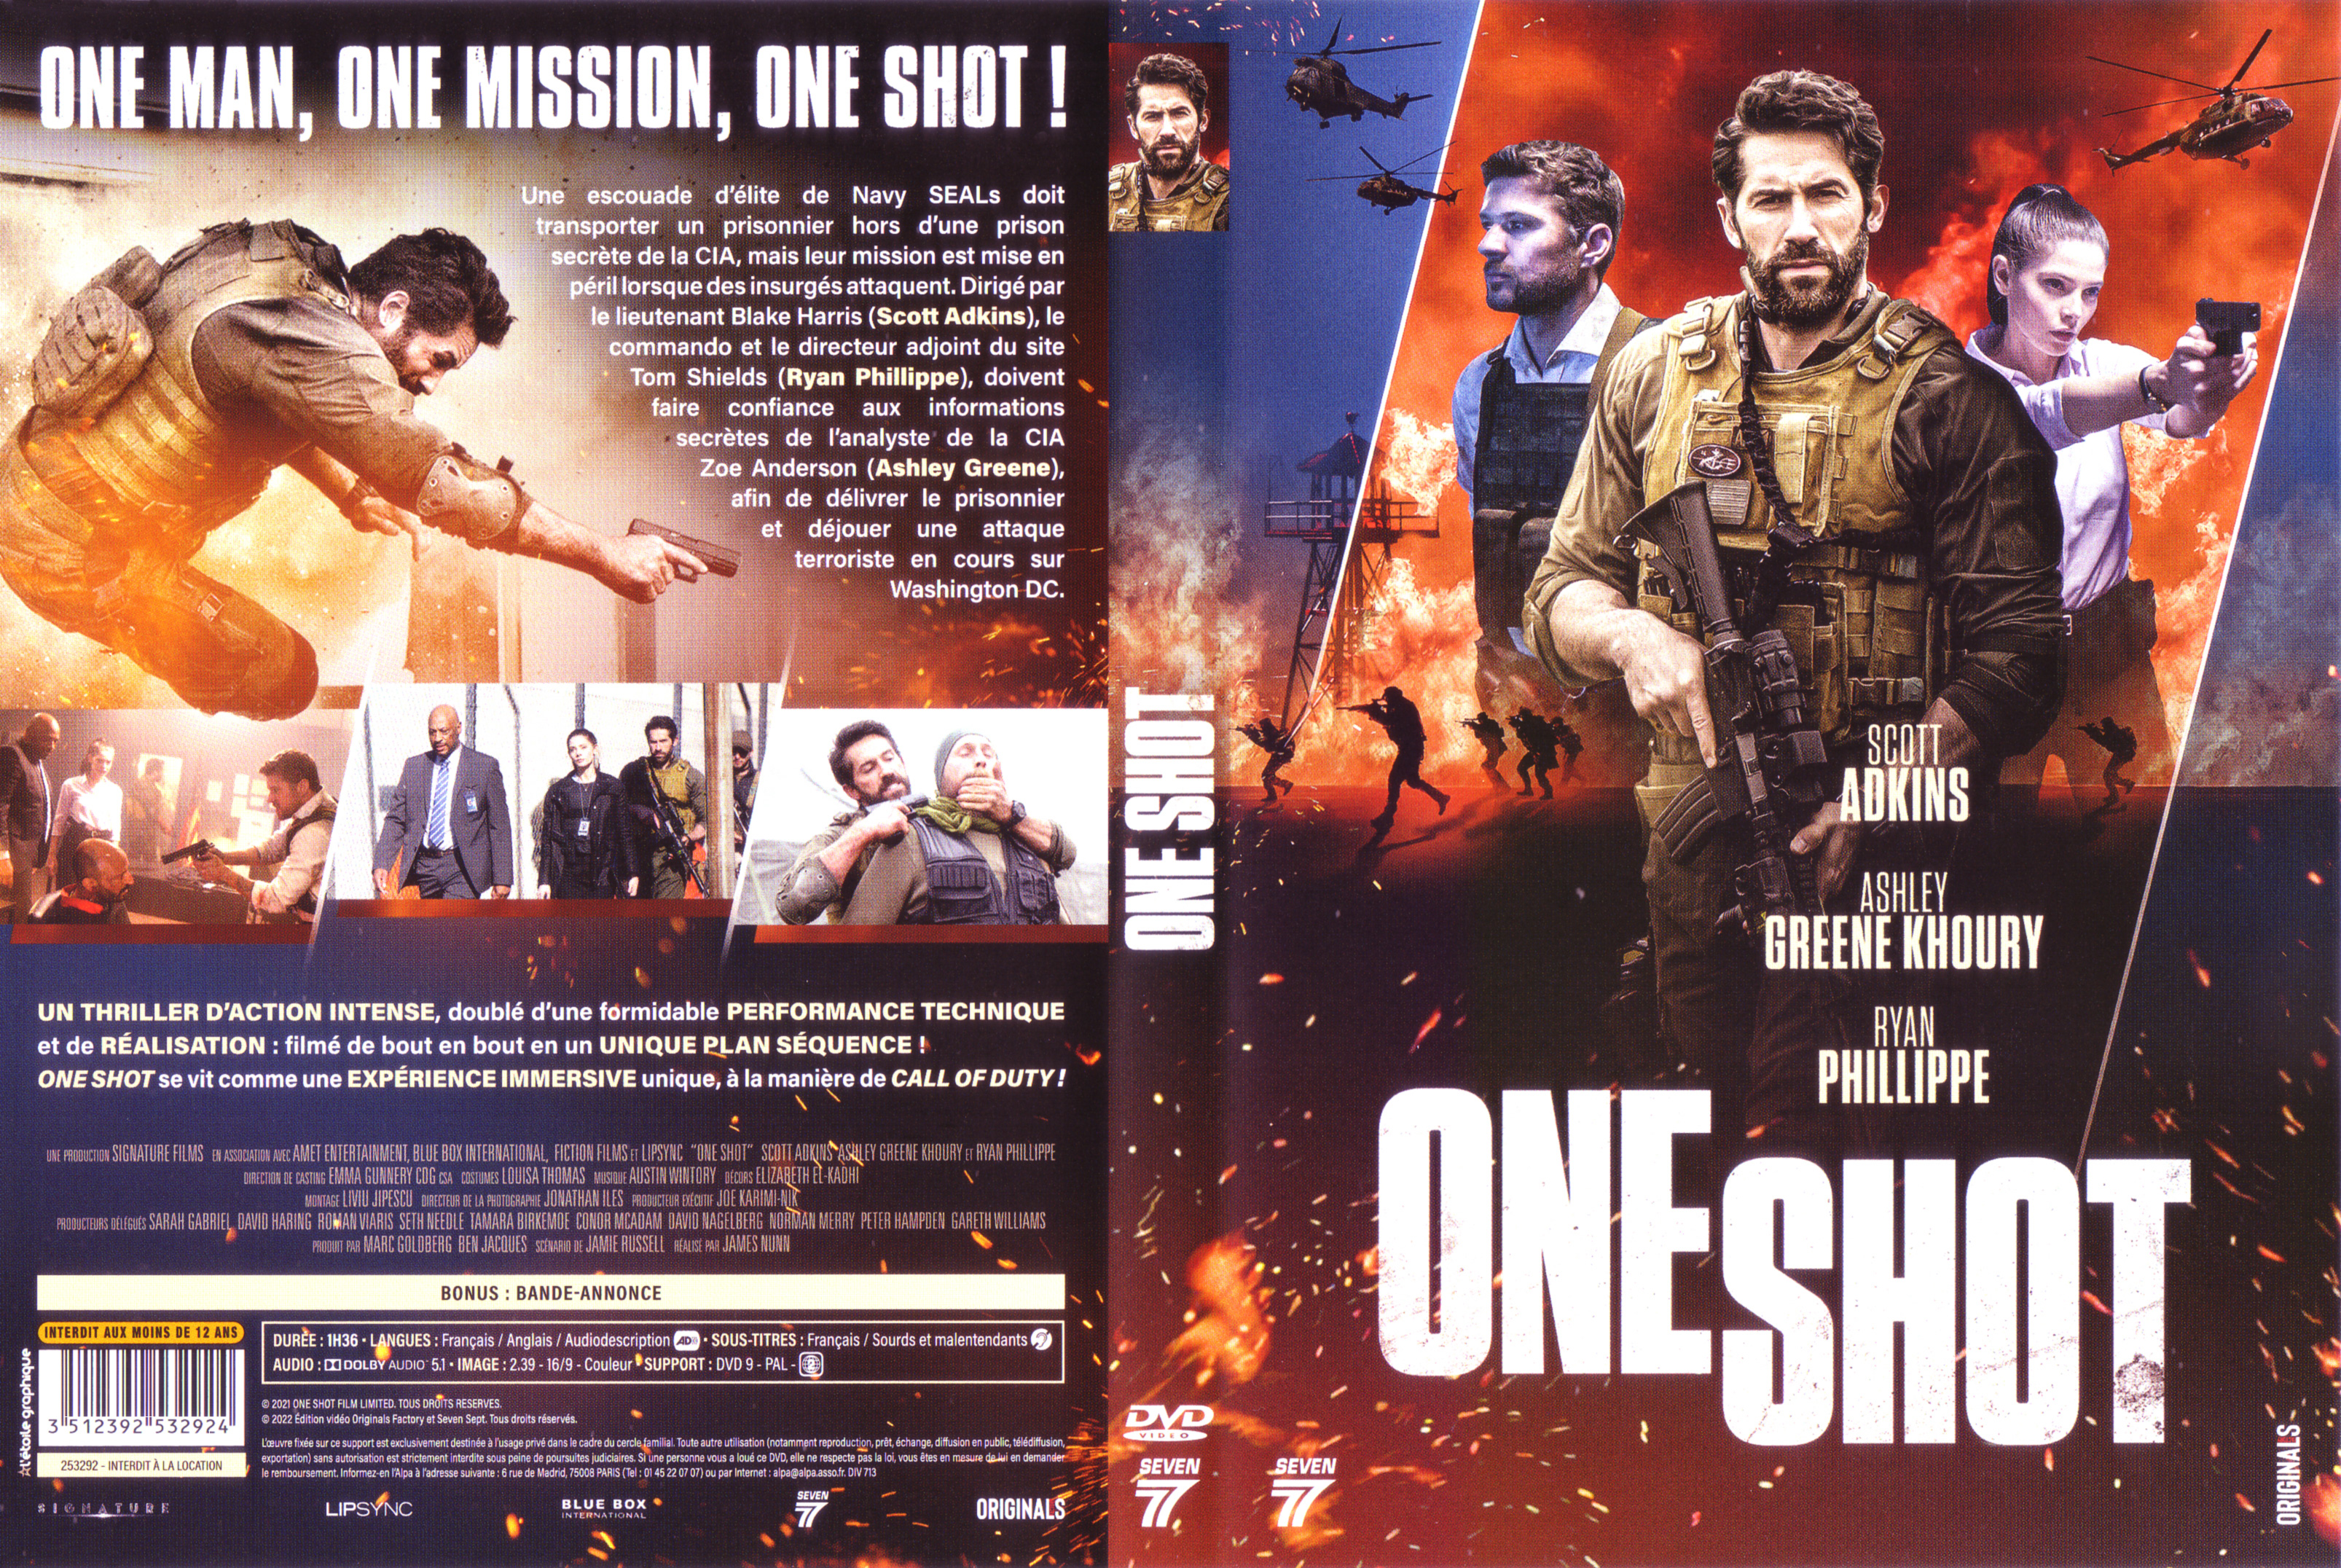 Jaquette DVD One shot (2021)